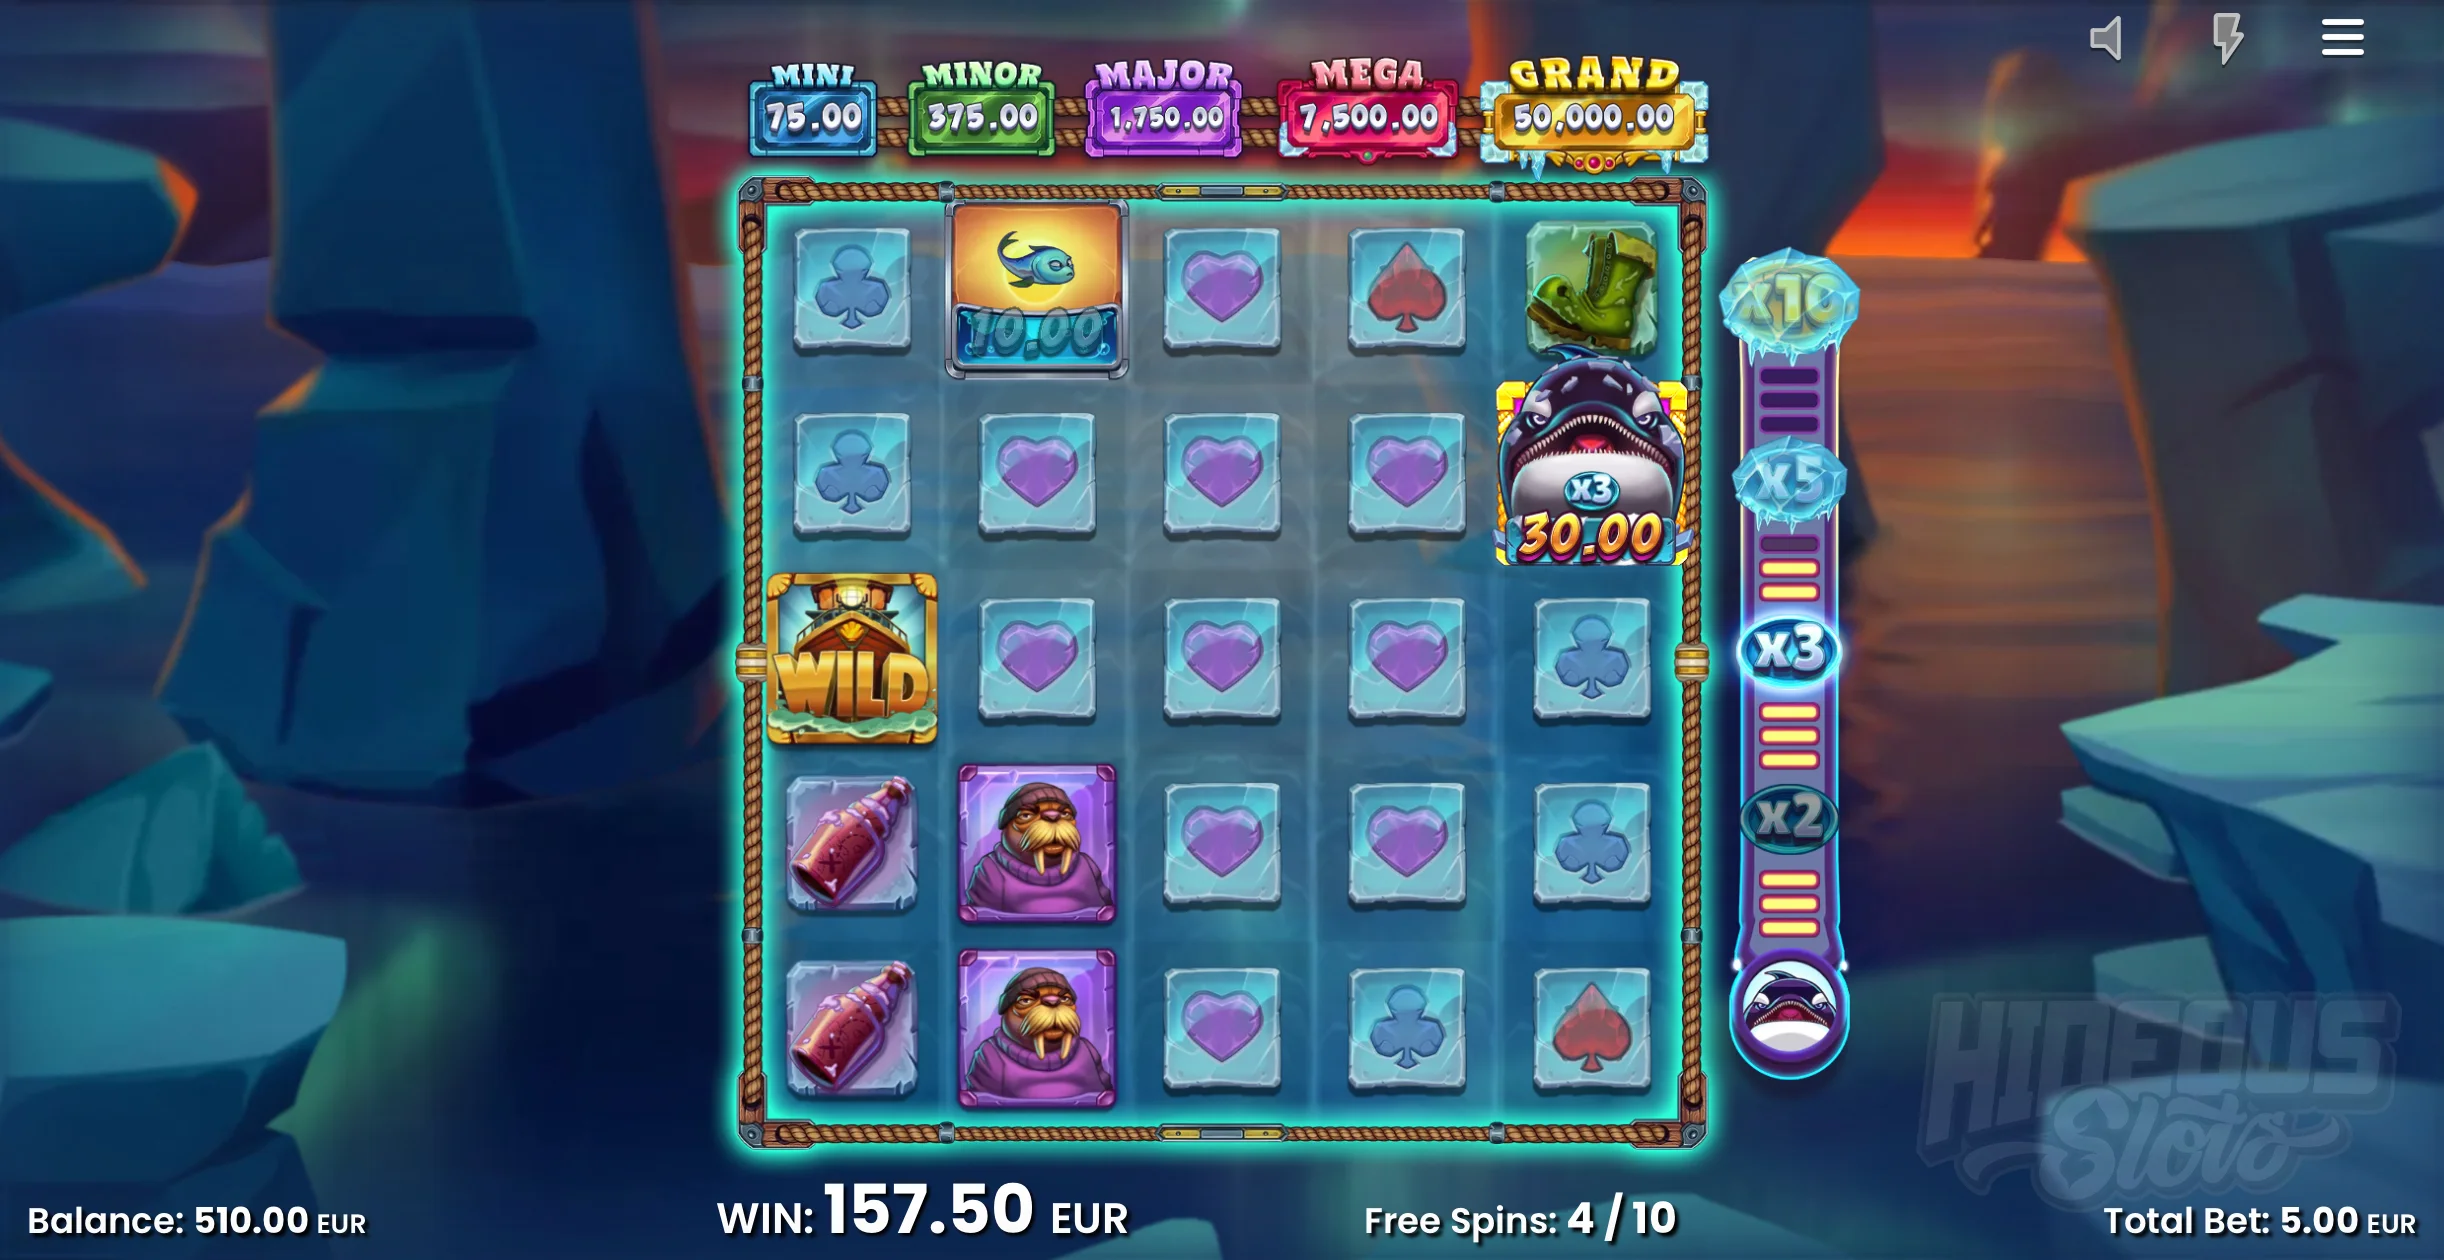 Players Can Progress Through Orca Multipliers up to x10 During Free Spins